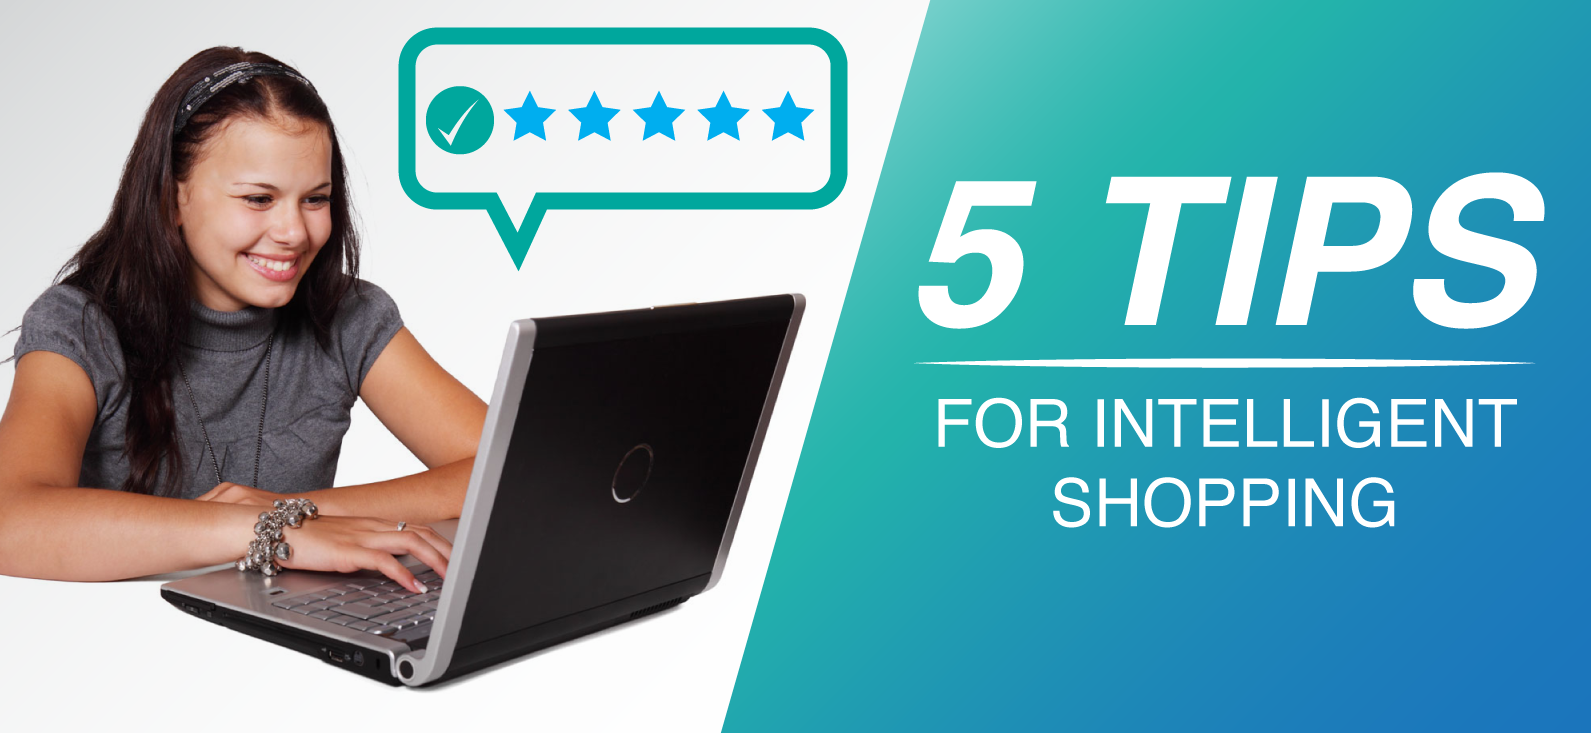 5 tips for Intelligent shopping, buying products with amazing reviews